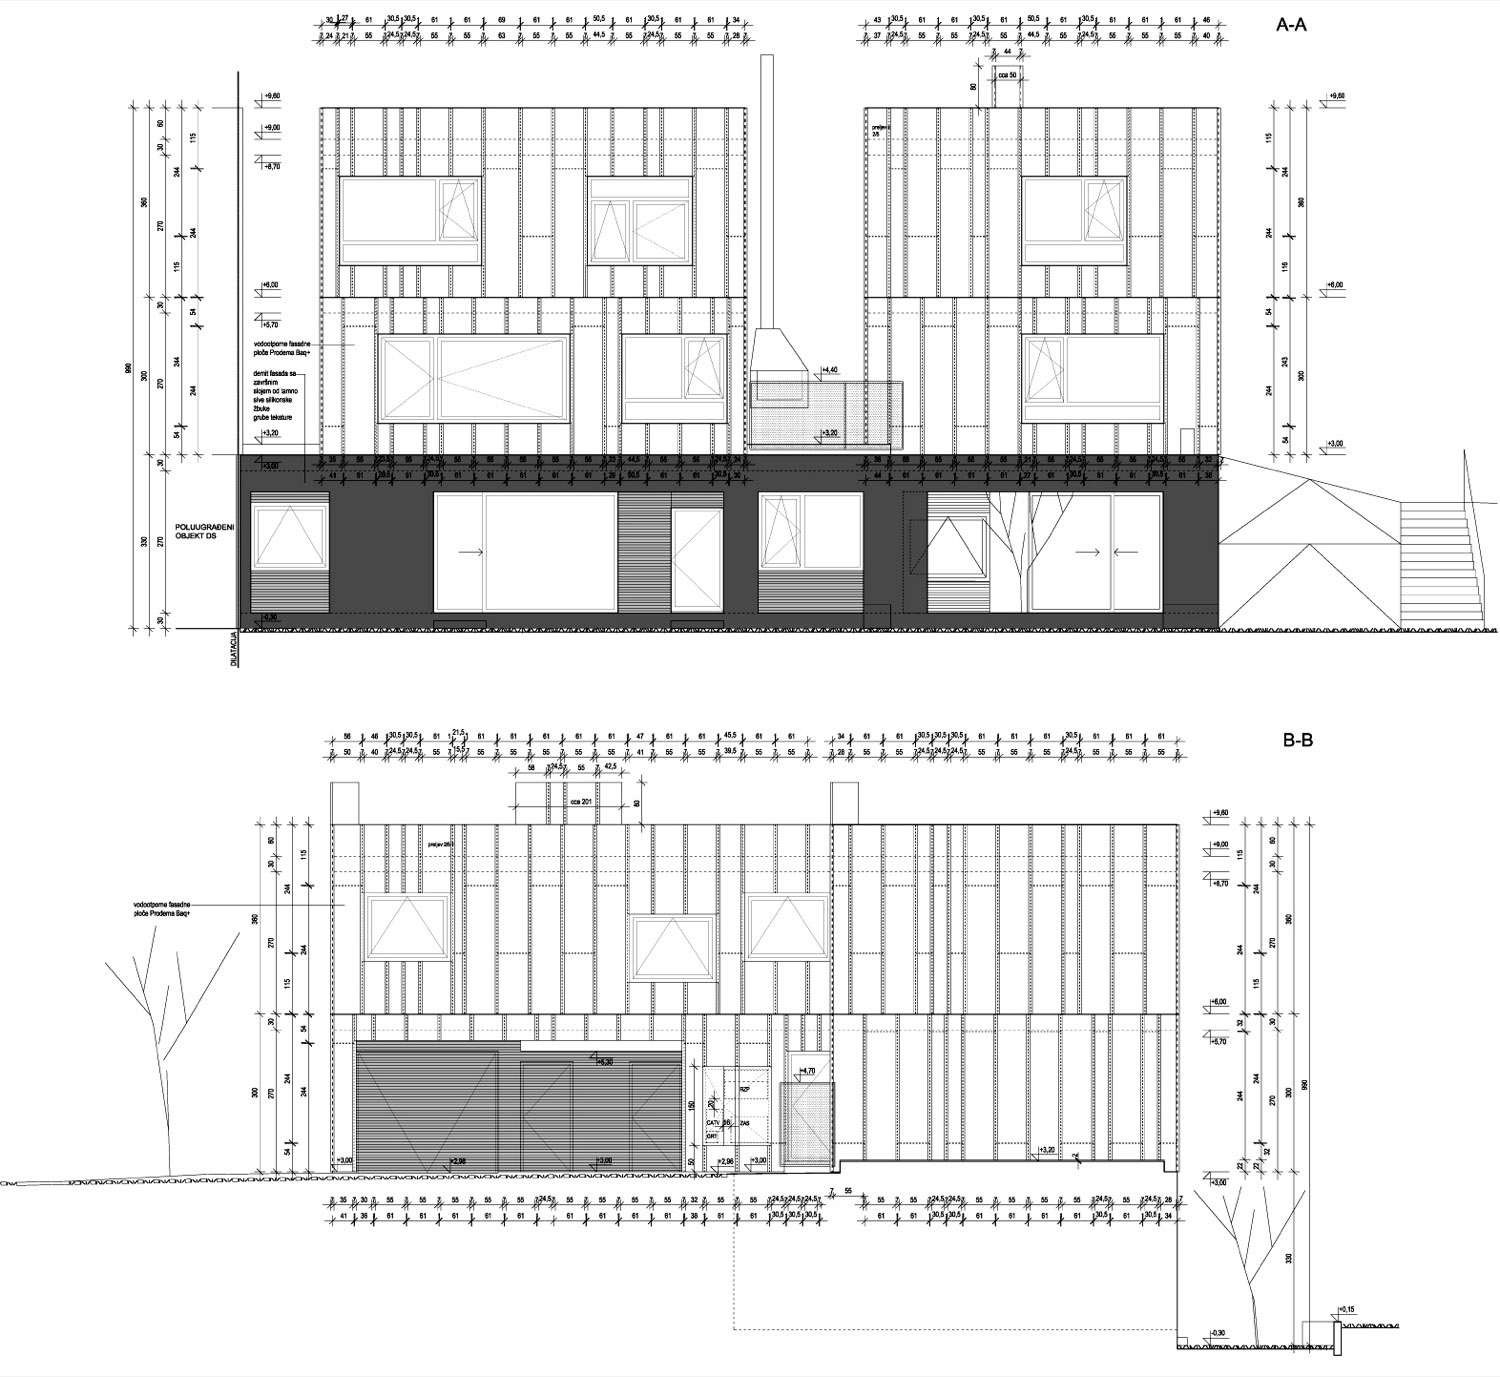 http://www.archdaily.com/wp-content/uploads/2009/12/1259686195-elevations.jpg